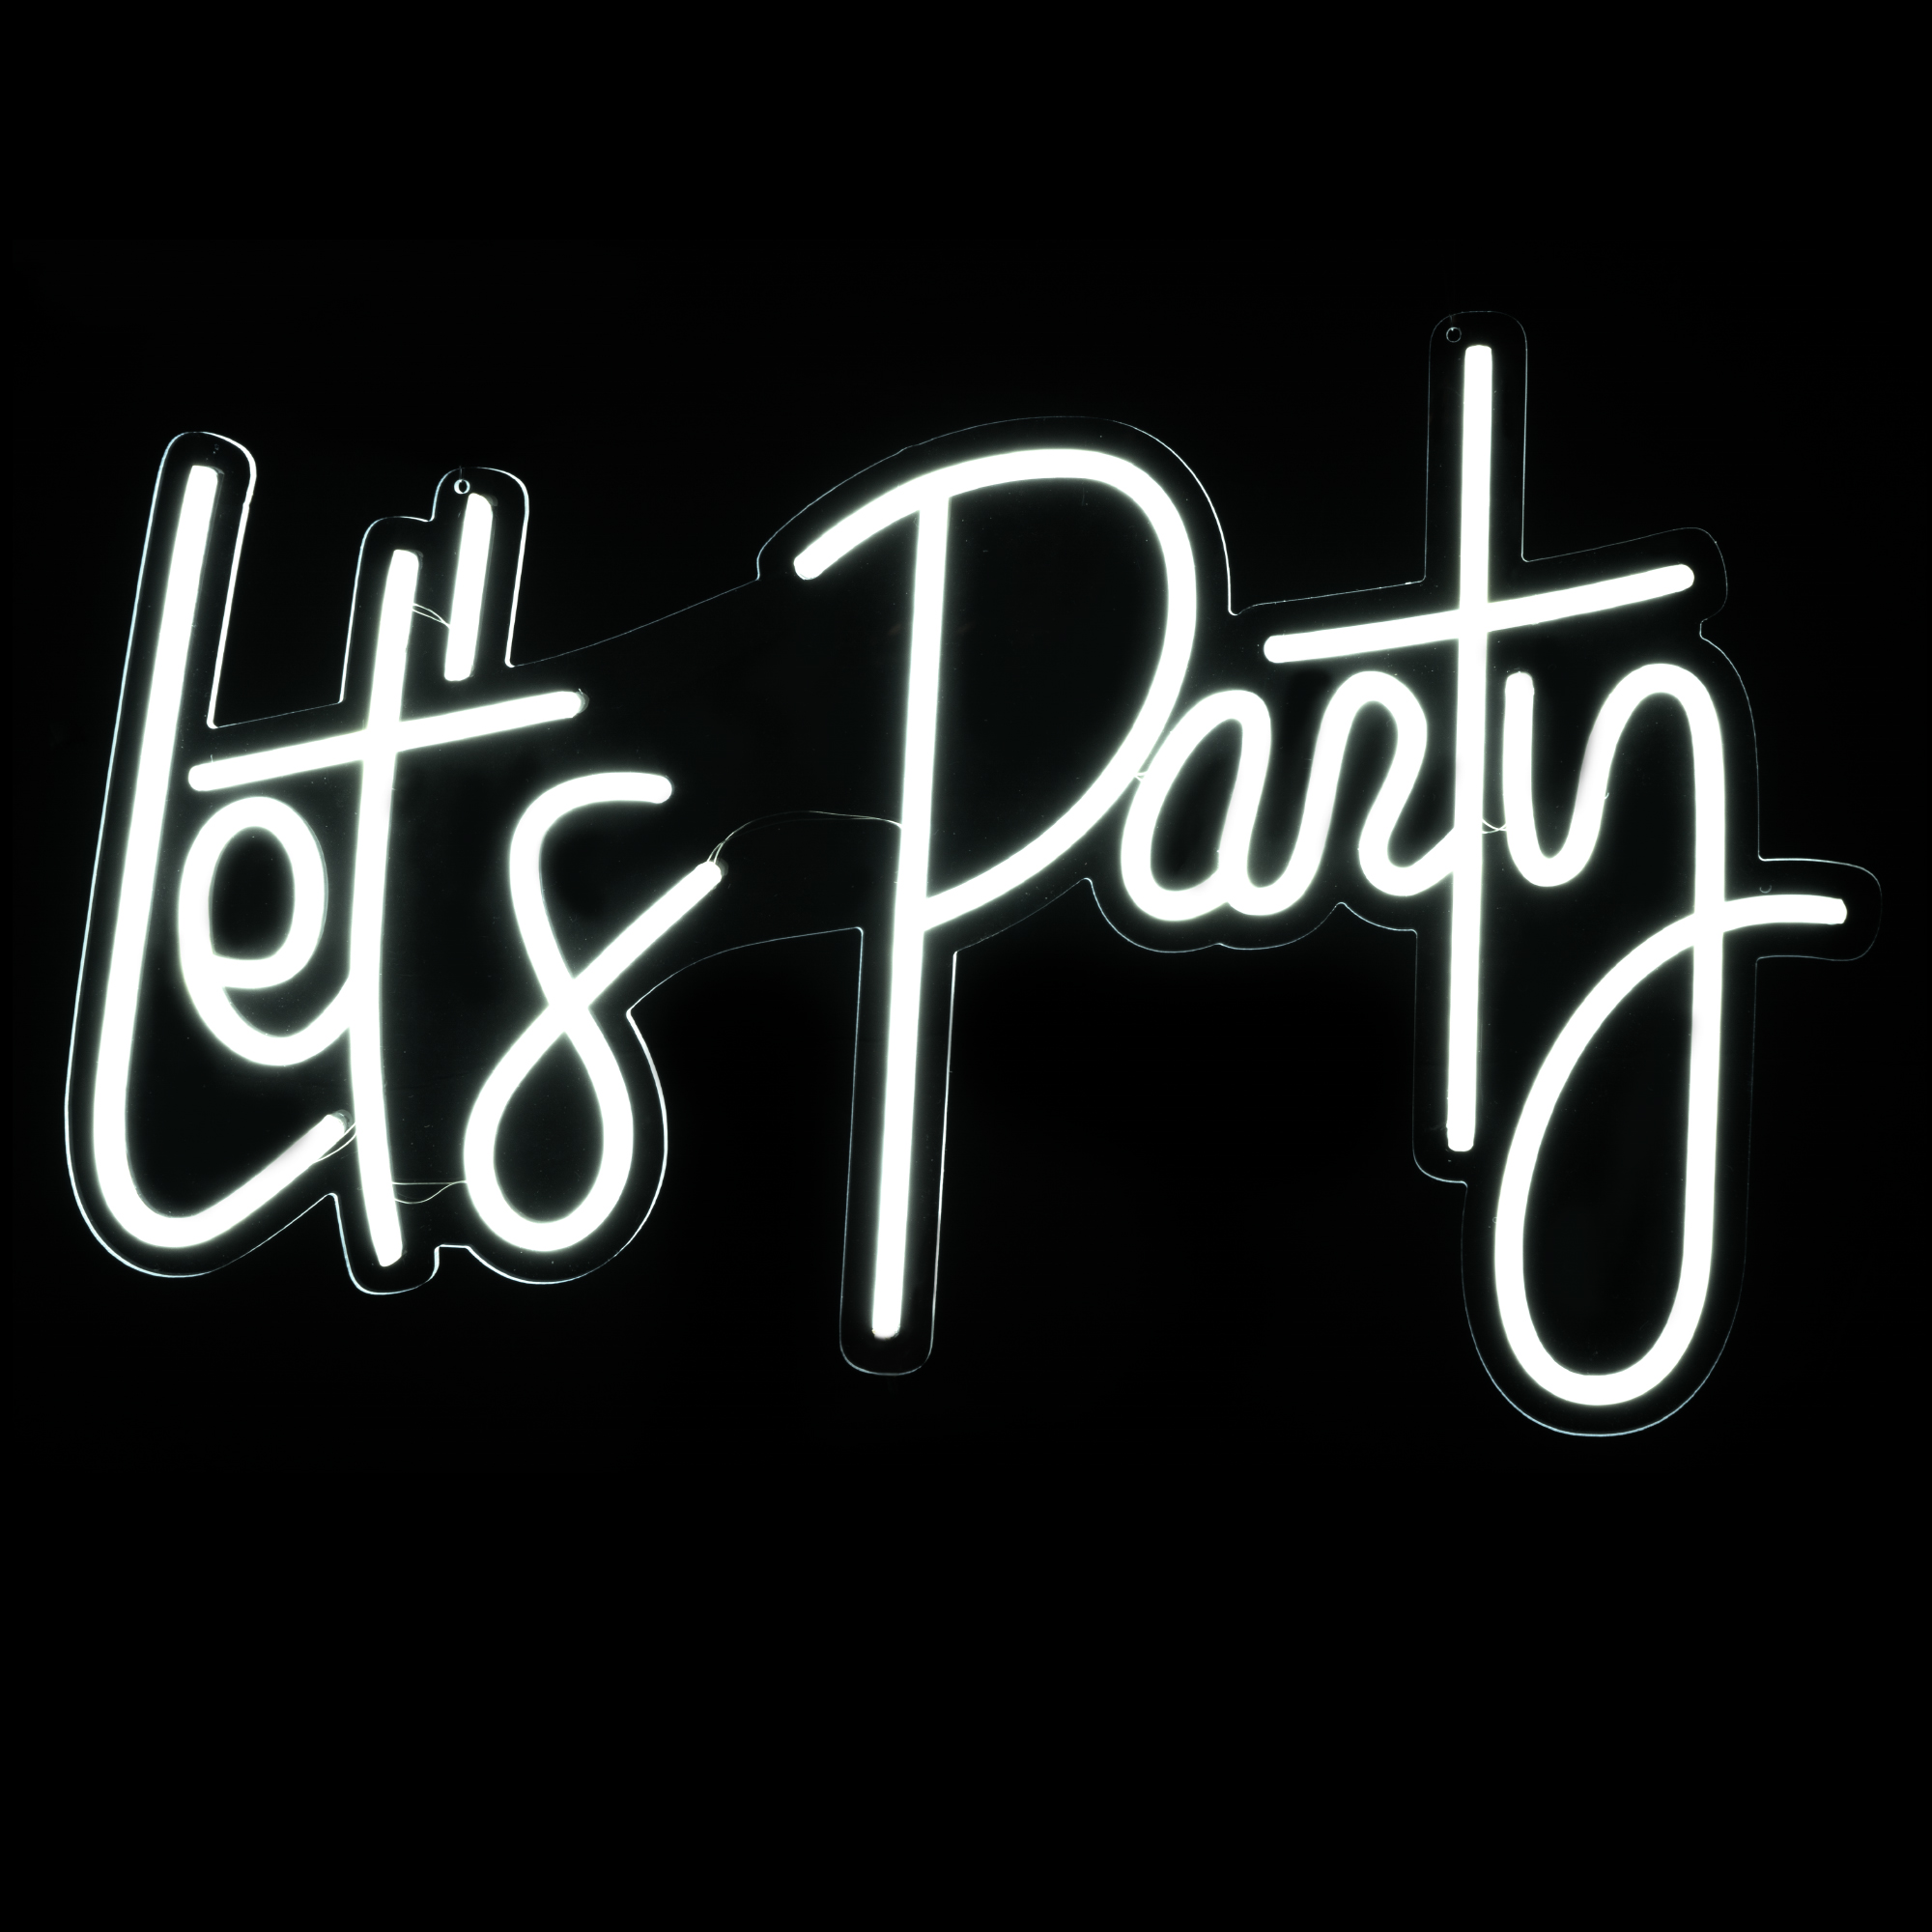 "Let's Party" Neon Light Sign With Hanging Chain 23“